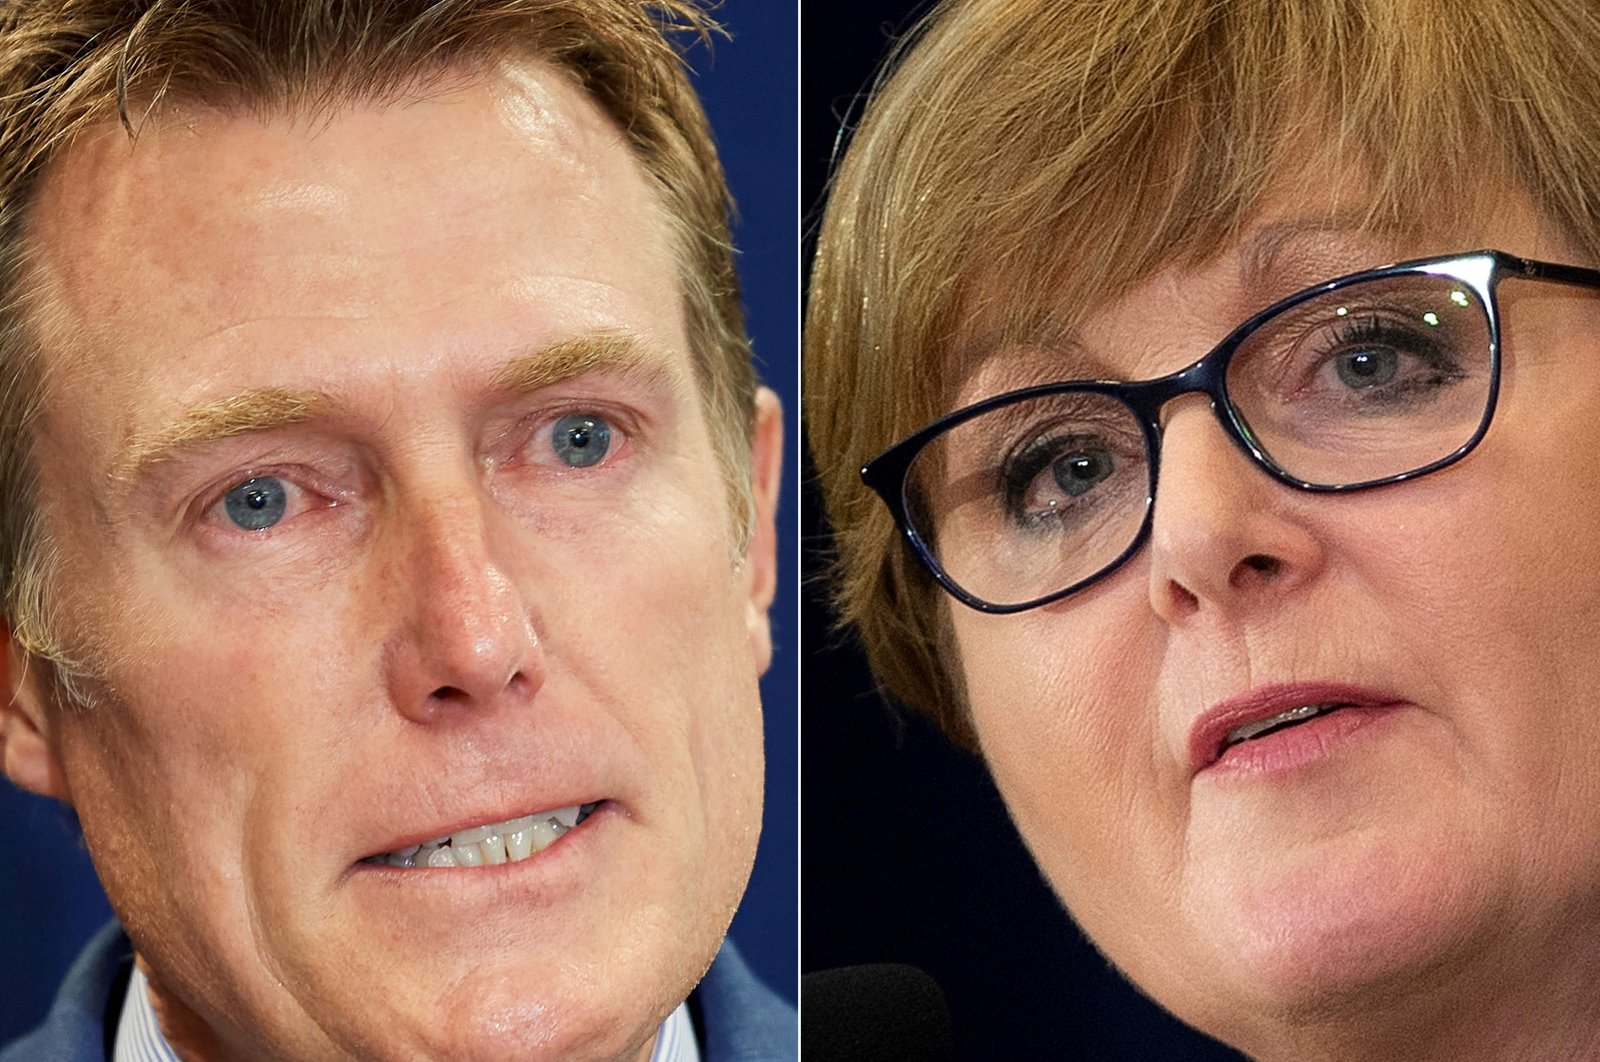 Australian then-Attorney General Christian Porter (L) at a press conference in Perth, Australia on March 3, 2021, and Australian then-Defense Minister Linda Reynolds (R) at a press conference with the U.S. State Department following the 30th AUSMIN, Washington, D.C., U.S., July 28, 2020. This combination of file photos was created on March 29, 2021. (AFP Photo)